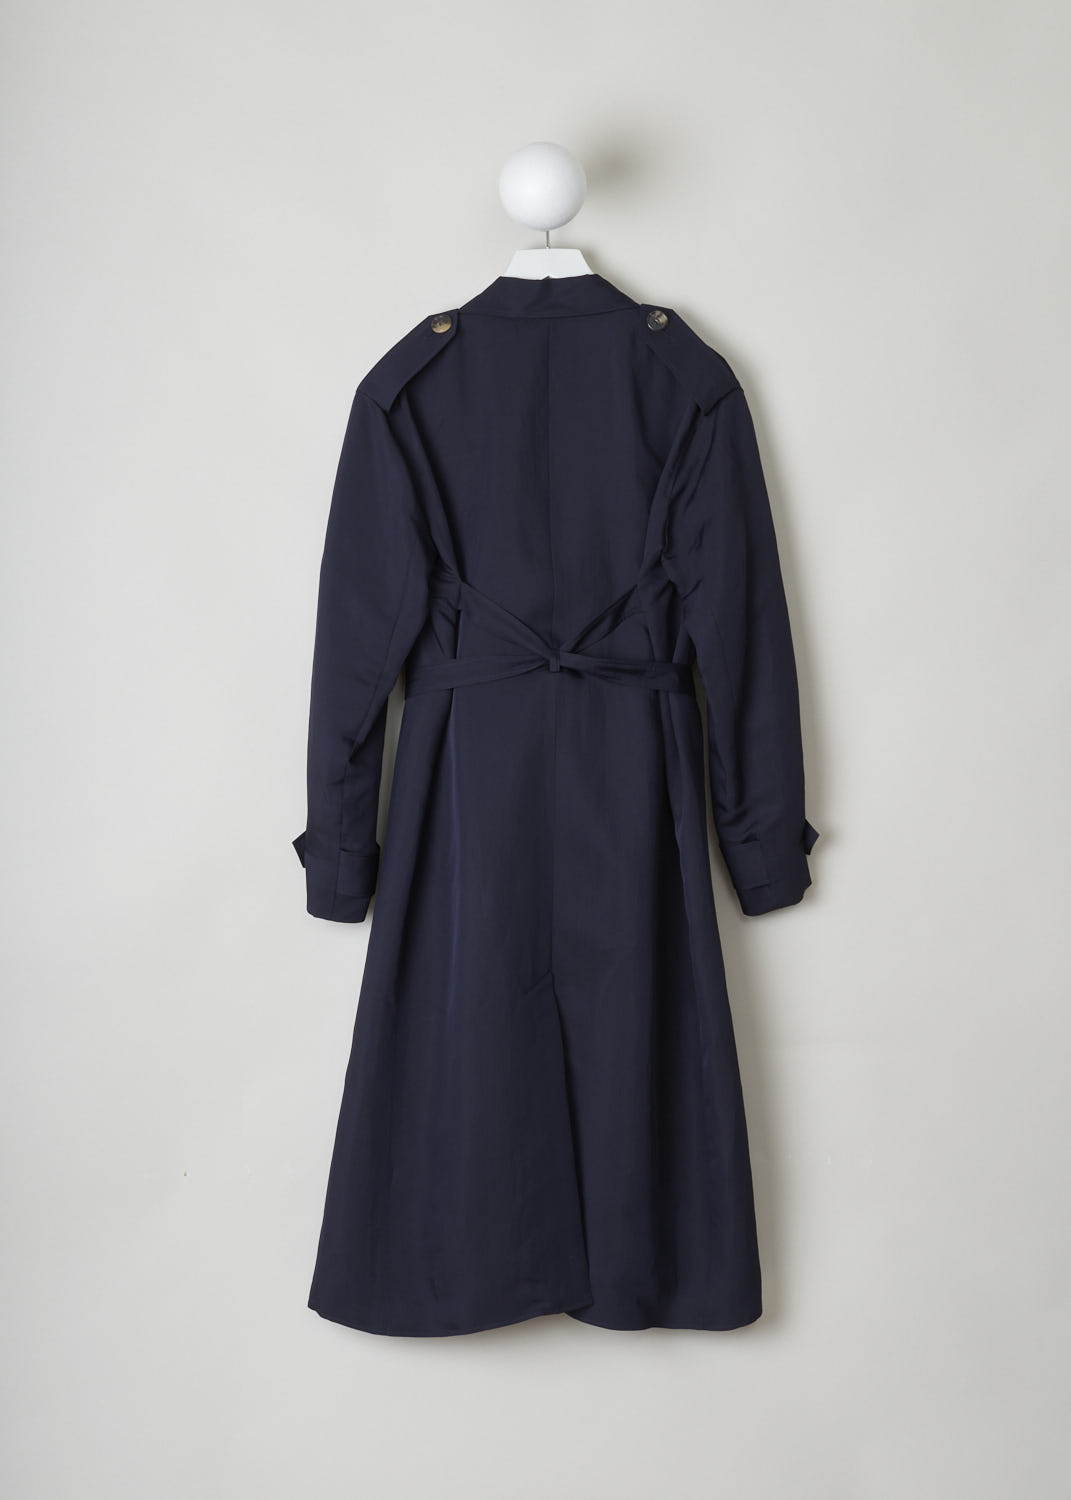 CÉLINE, MIDNIGHT BLUE RAINCOAT, 6464_28U36_0MI_C01, Blue, Back, Elegant midnight blue trench coat. The coat has a notched lapel and classic details such as epaulets and storm flaps. Two rows of buttons form the closing option. The coat comes with a matching belt to cinch in the waist. The long sleeves have sleeve straps on the cuffs. A slanted pocket can be found on either side. In the back, the coat has a centre slit.